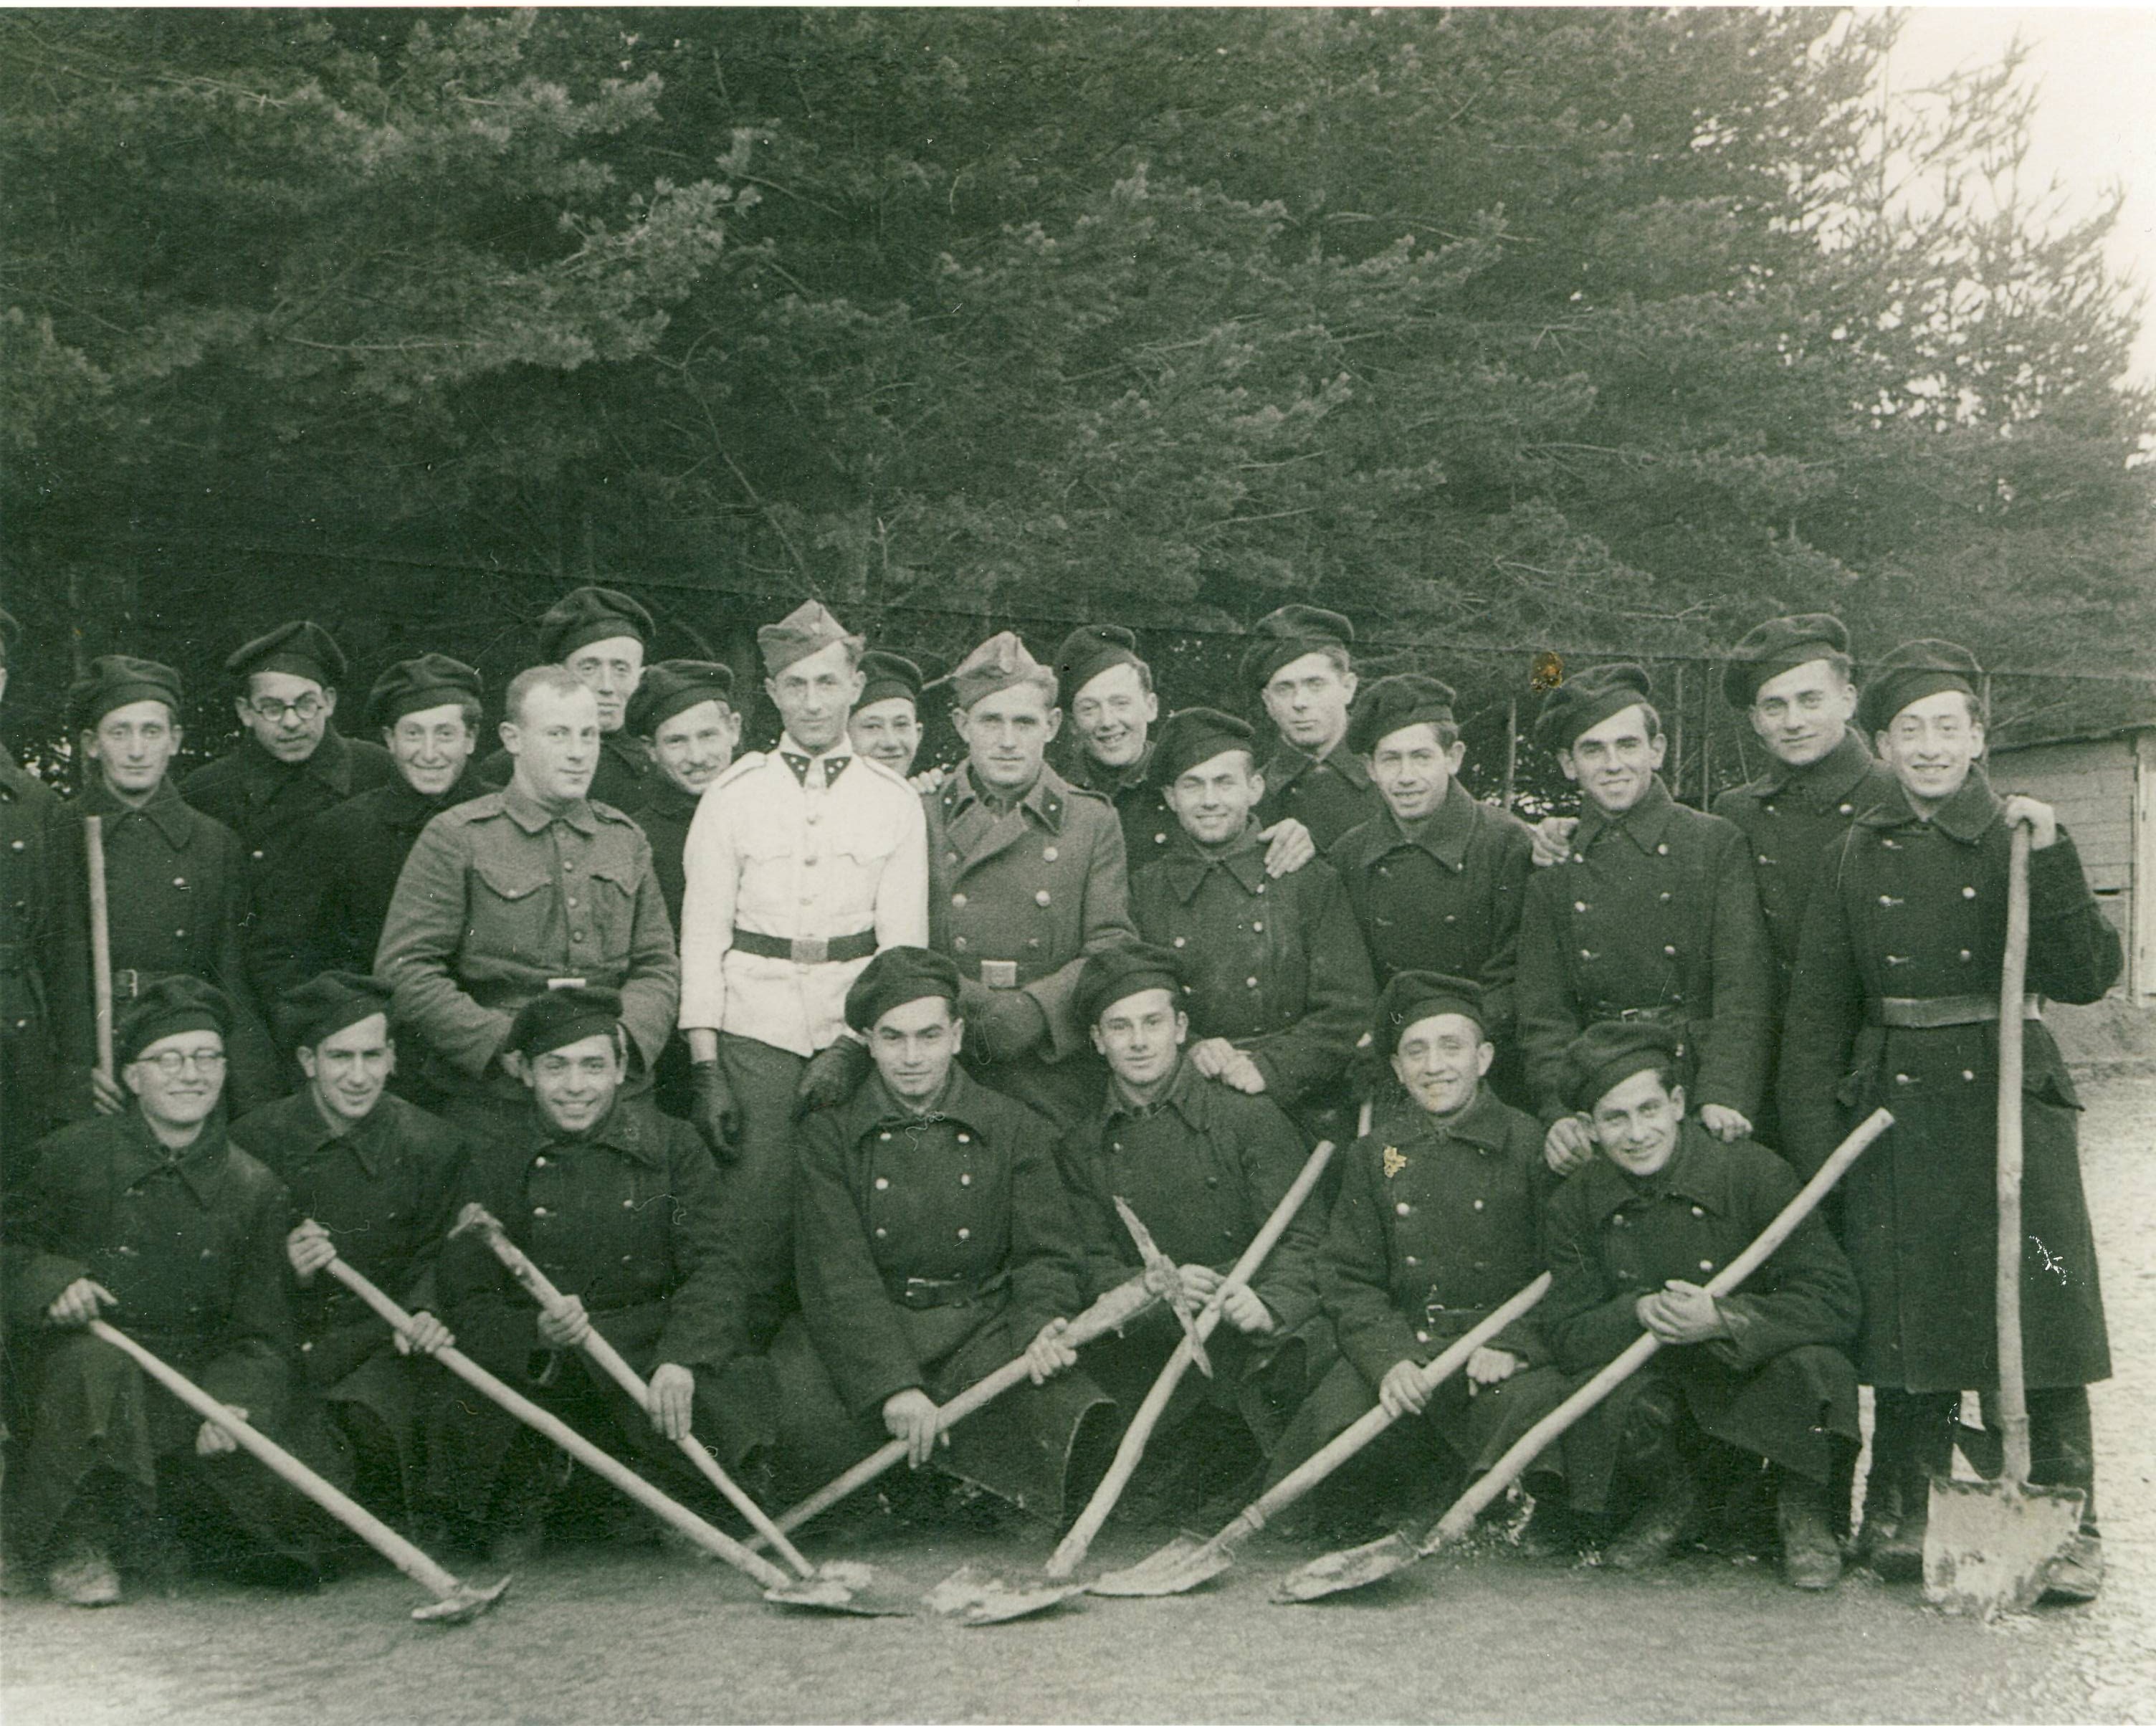 Work Brigade 1941 in Hummene posing with shovels